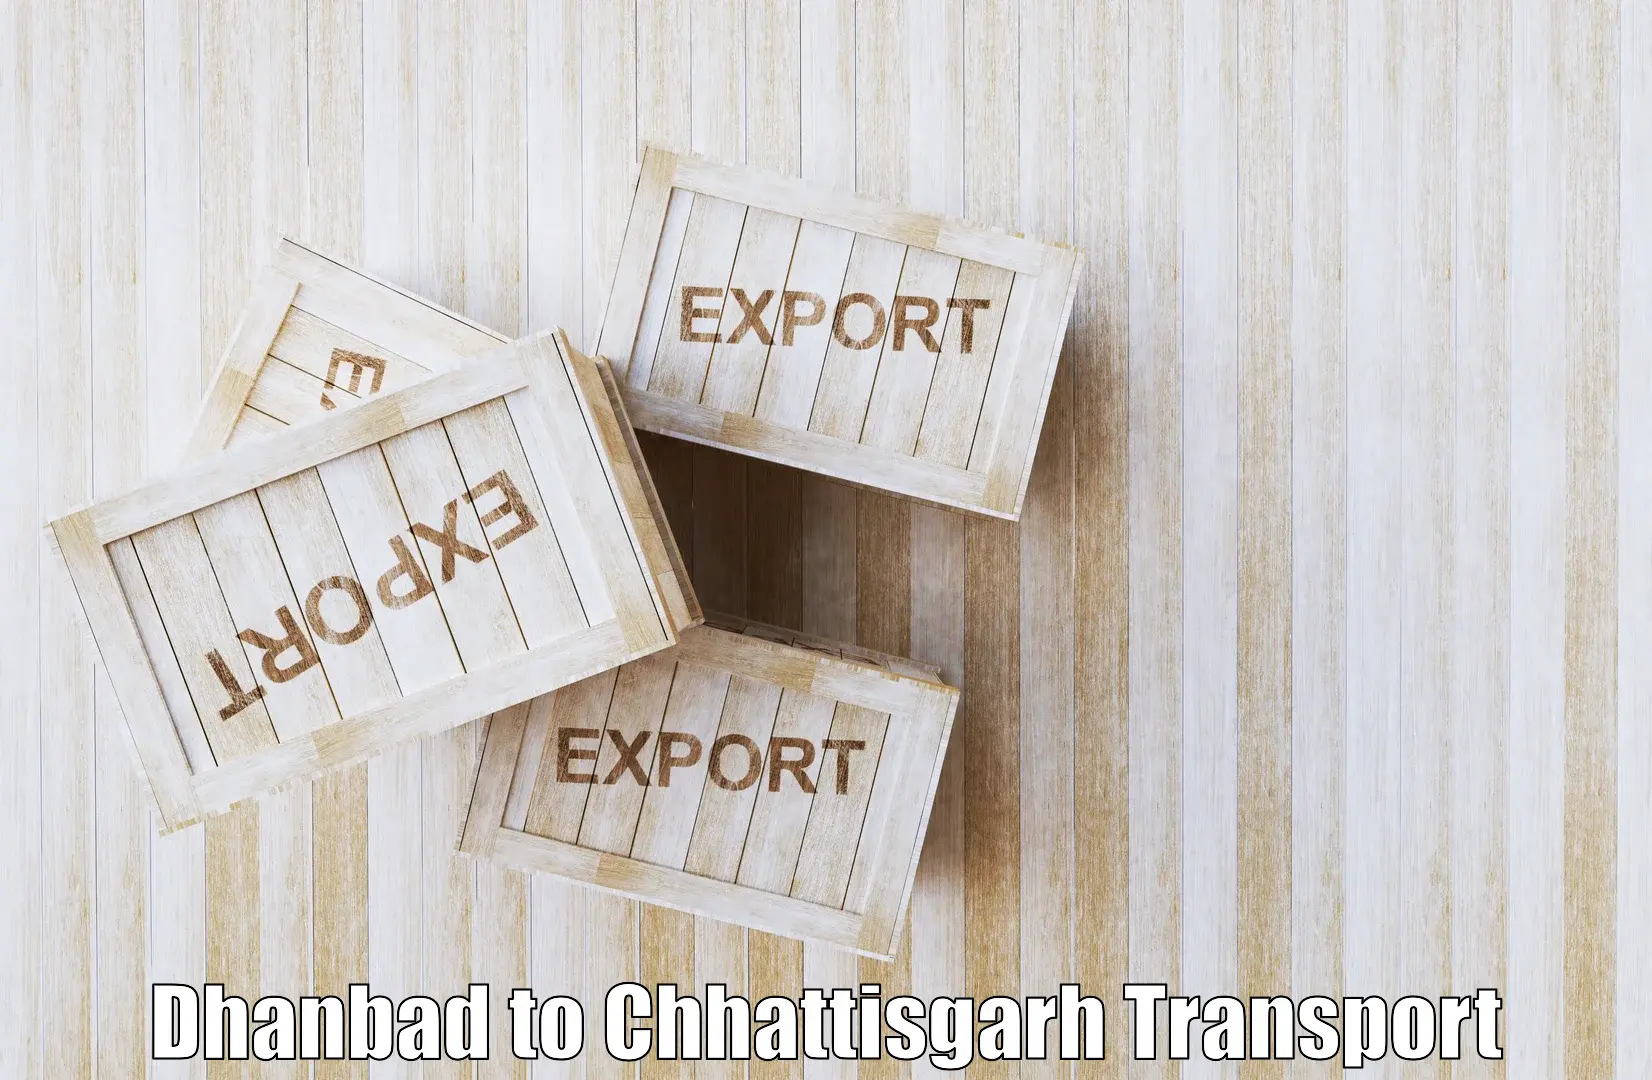 Express transport services Dhanbad to Gariaband